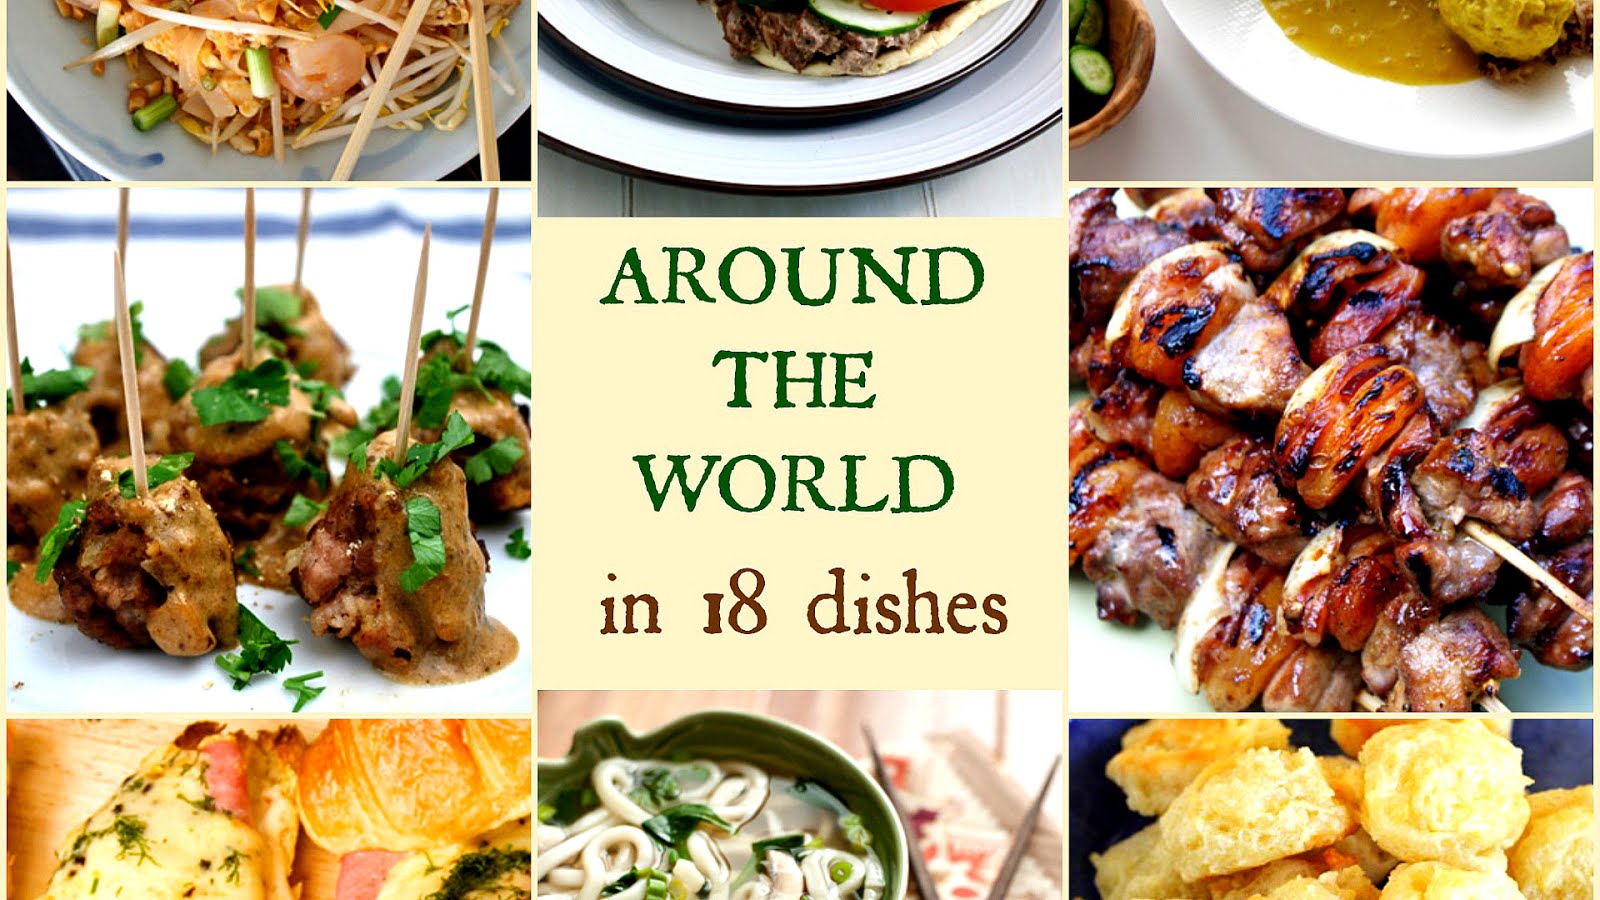 Around The World Dishes - Dish Choices